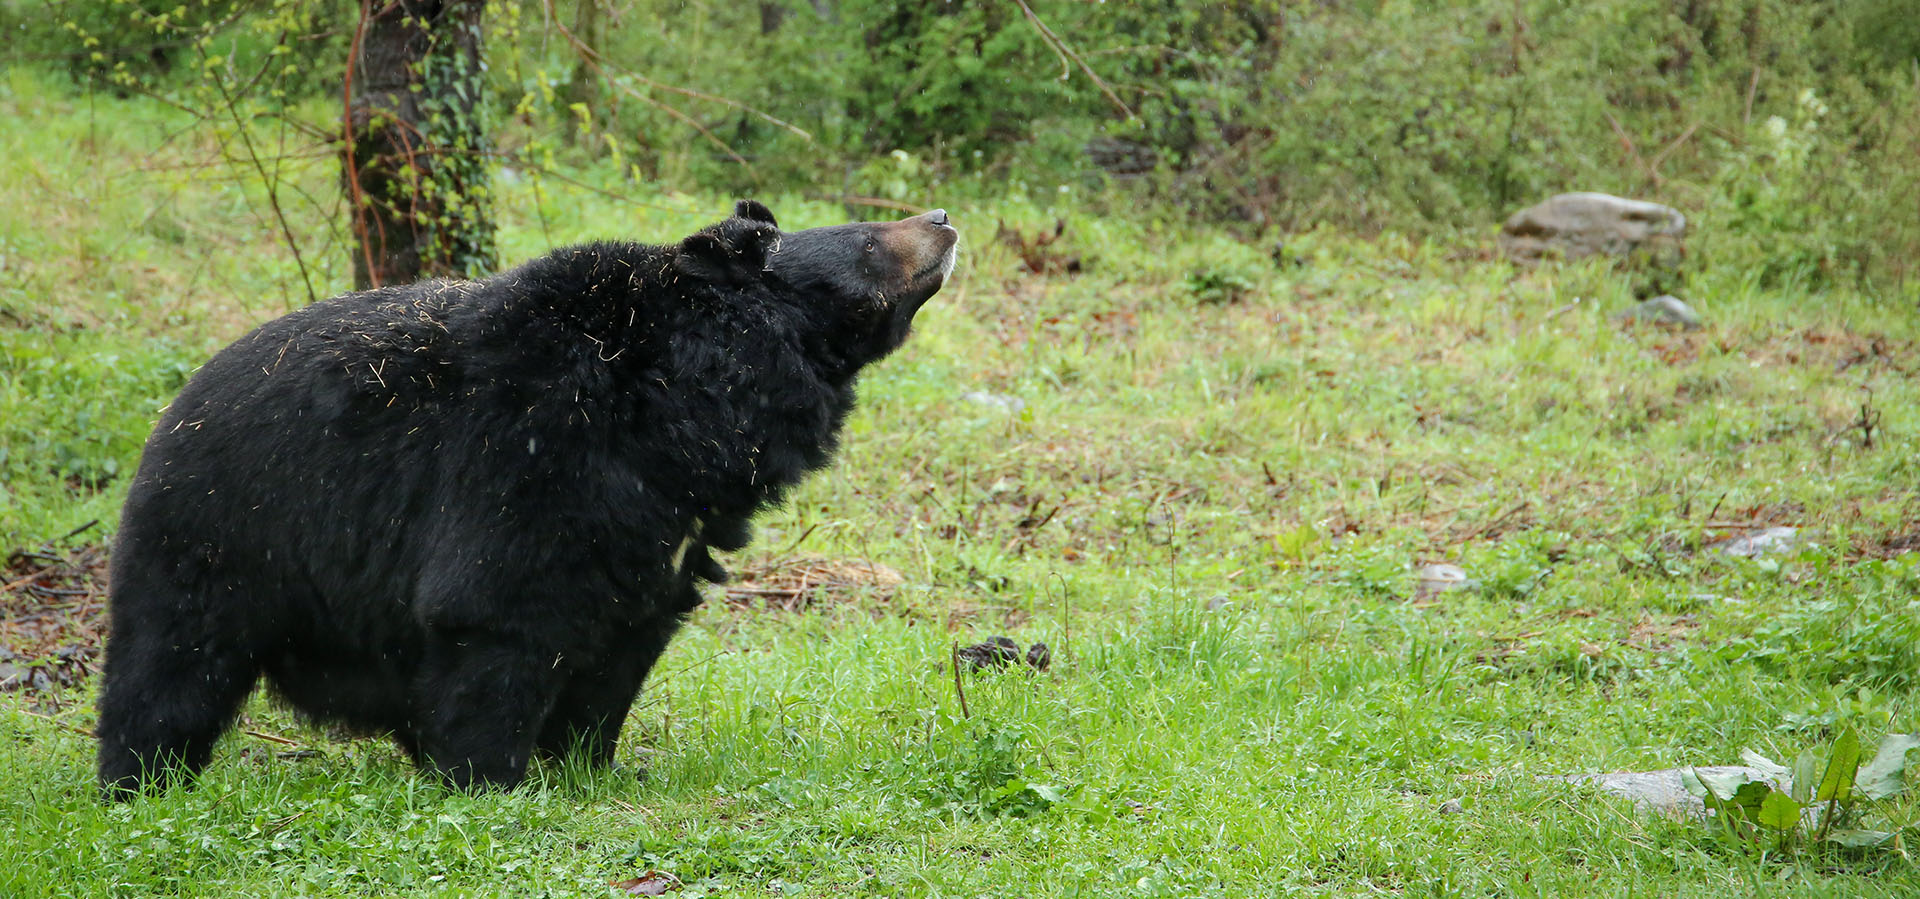 Get To Know Your Indian Bears! - Wildlife SOS